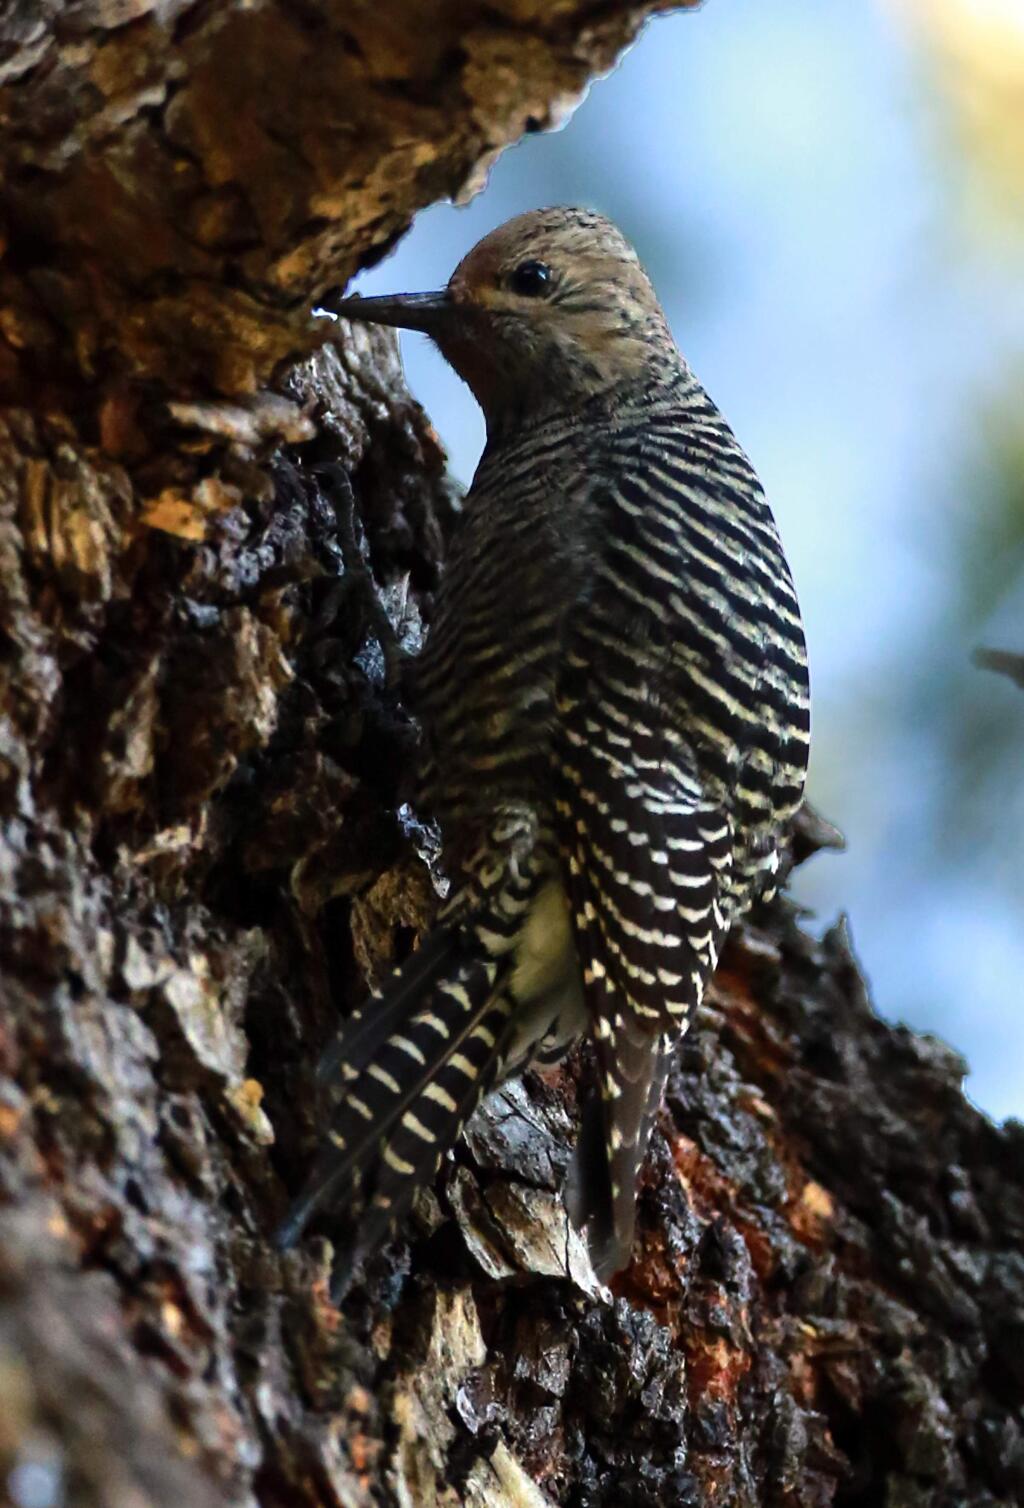 A female Williamson's sapsucker made a rare appearance in a tree at the Flamingo Hotel in Santa Rosa. The bird is a stray from its native Sierra Nevada. (Photo by John Burgess/The Press Democrat)